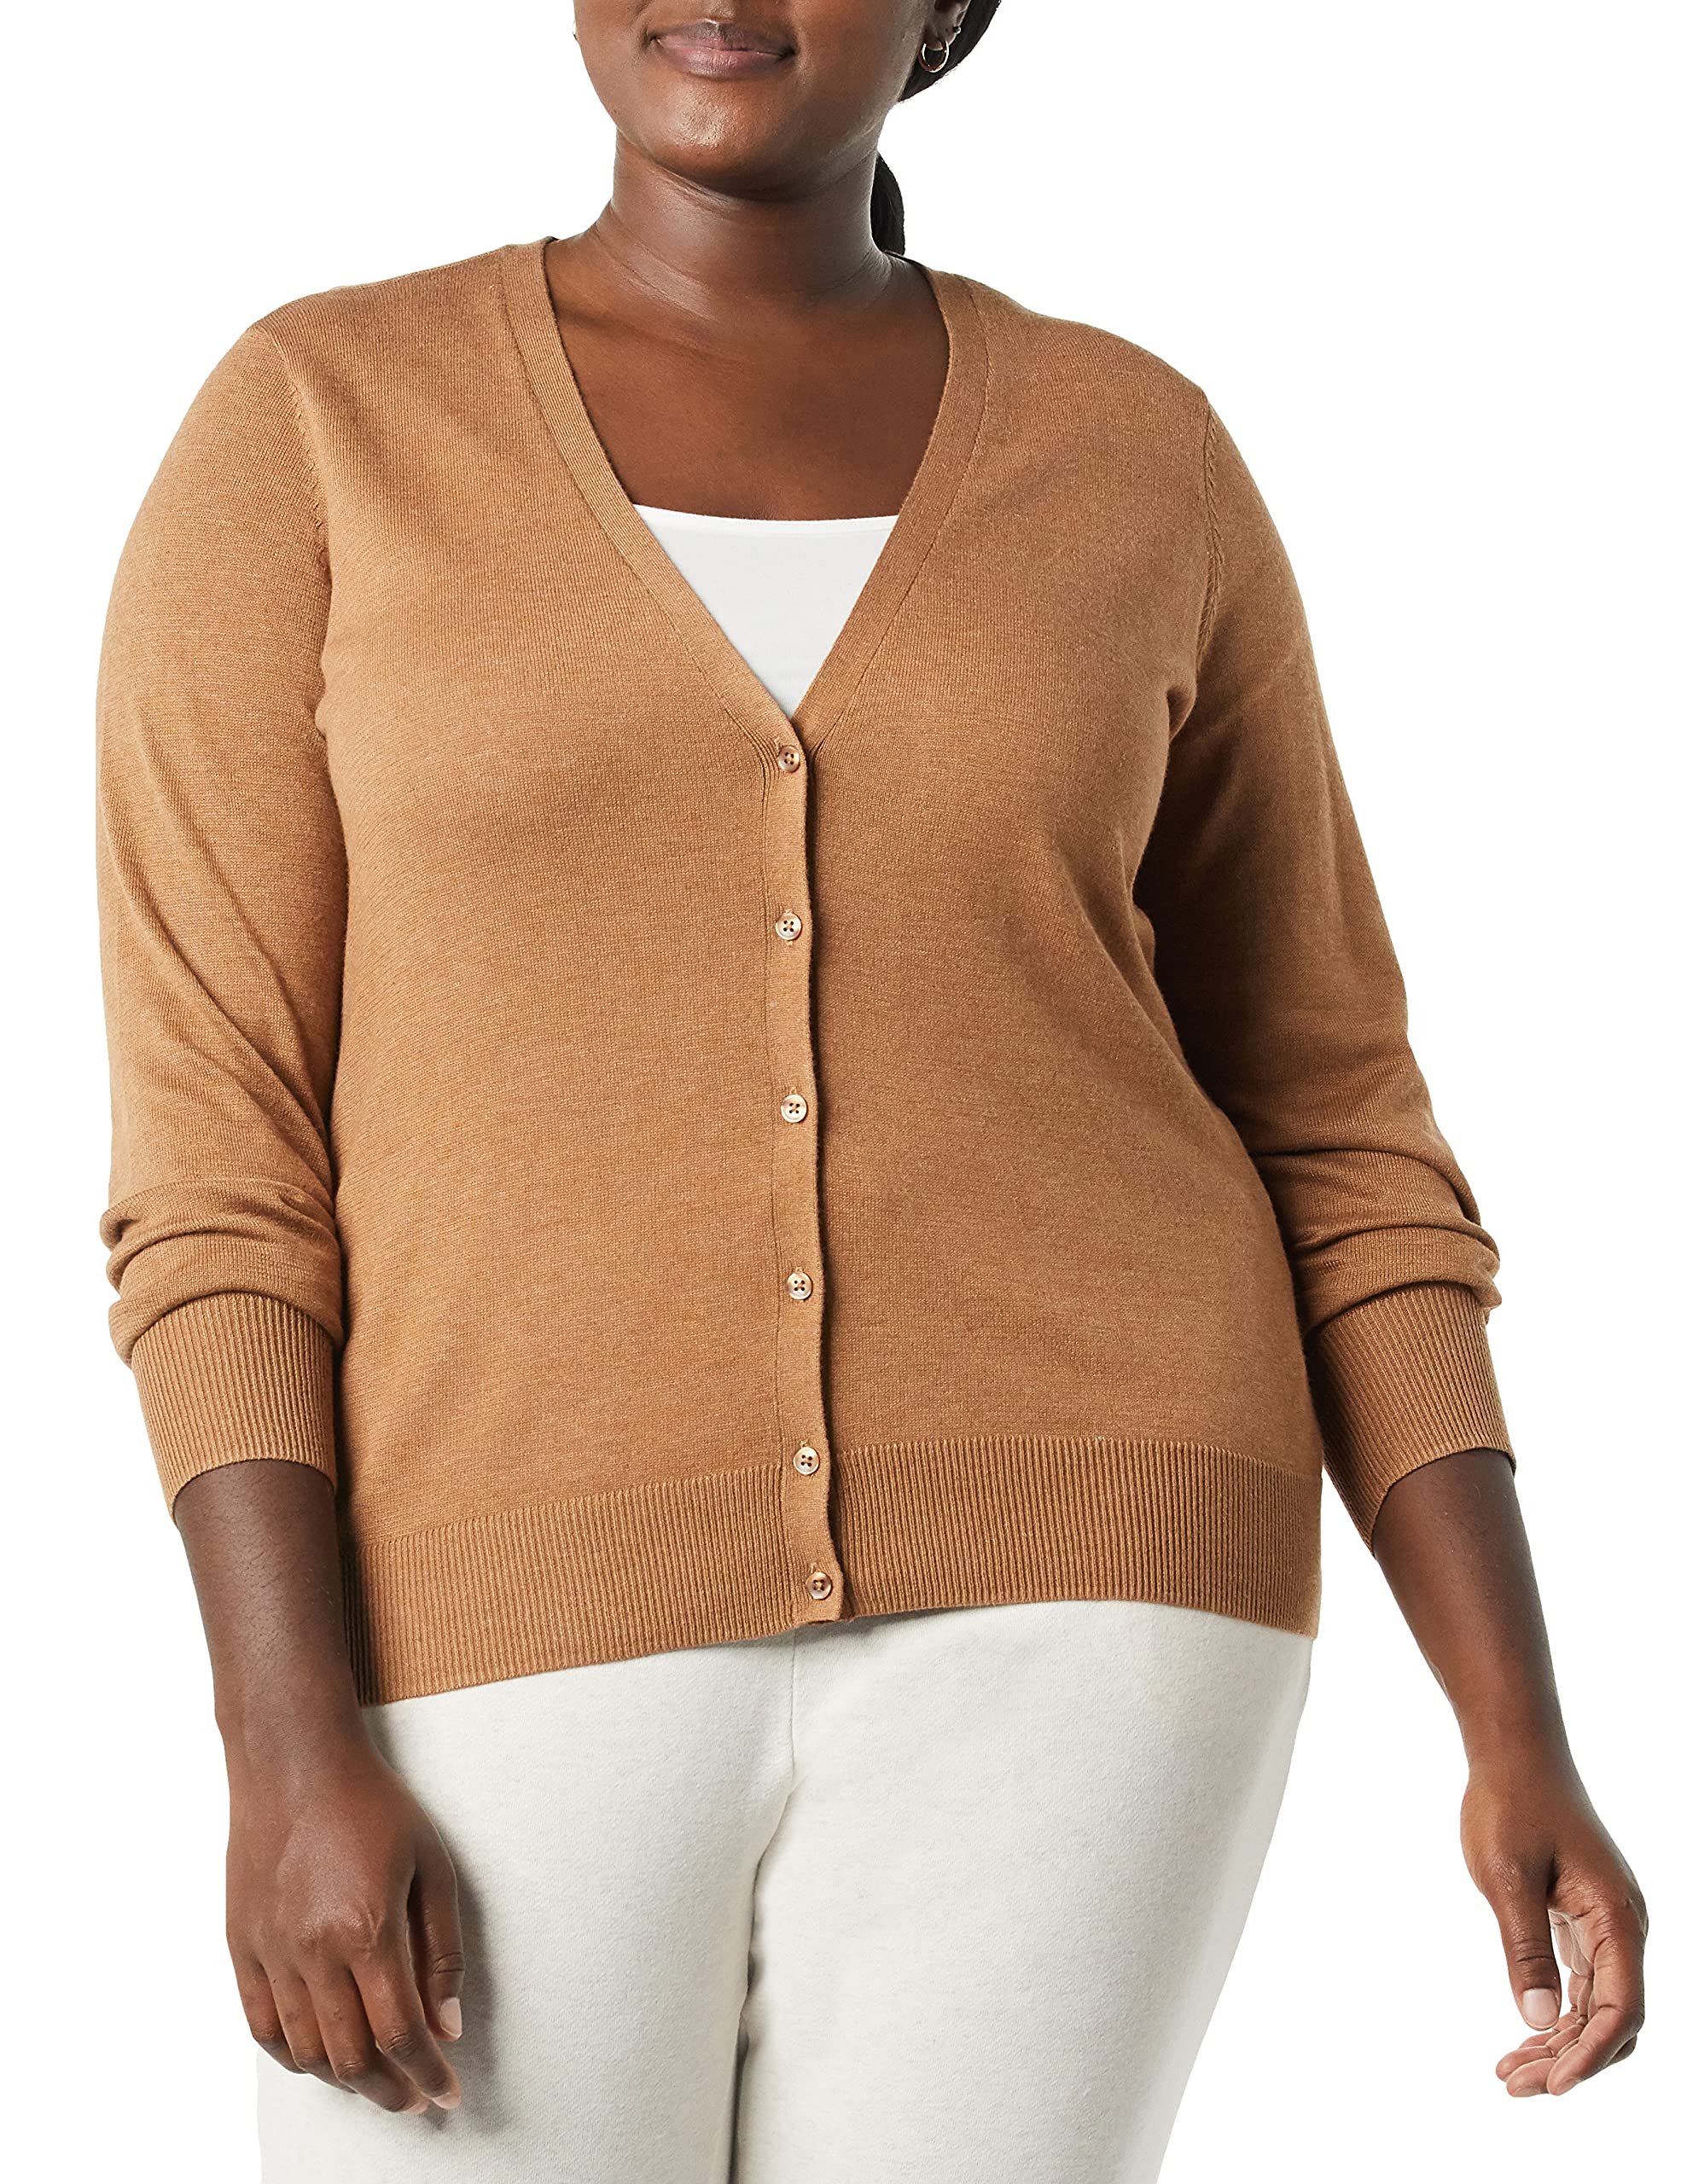 Amazon Essentials Women's Lightweight V-Neck Cardigan Sweater (Available in Plus Size)